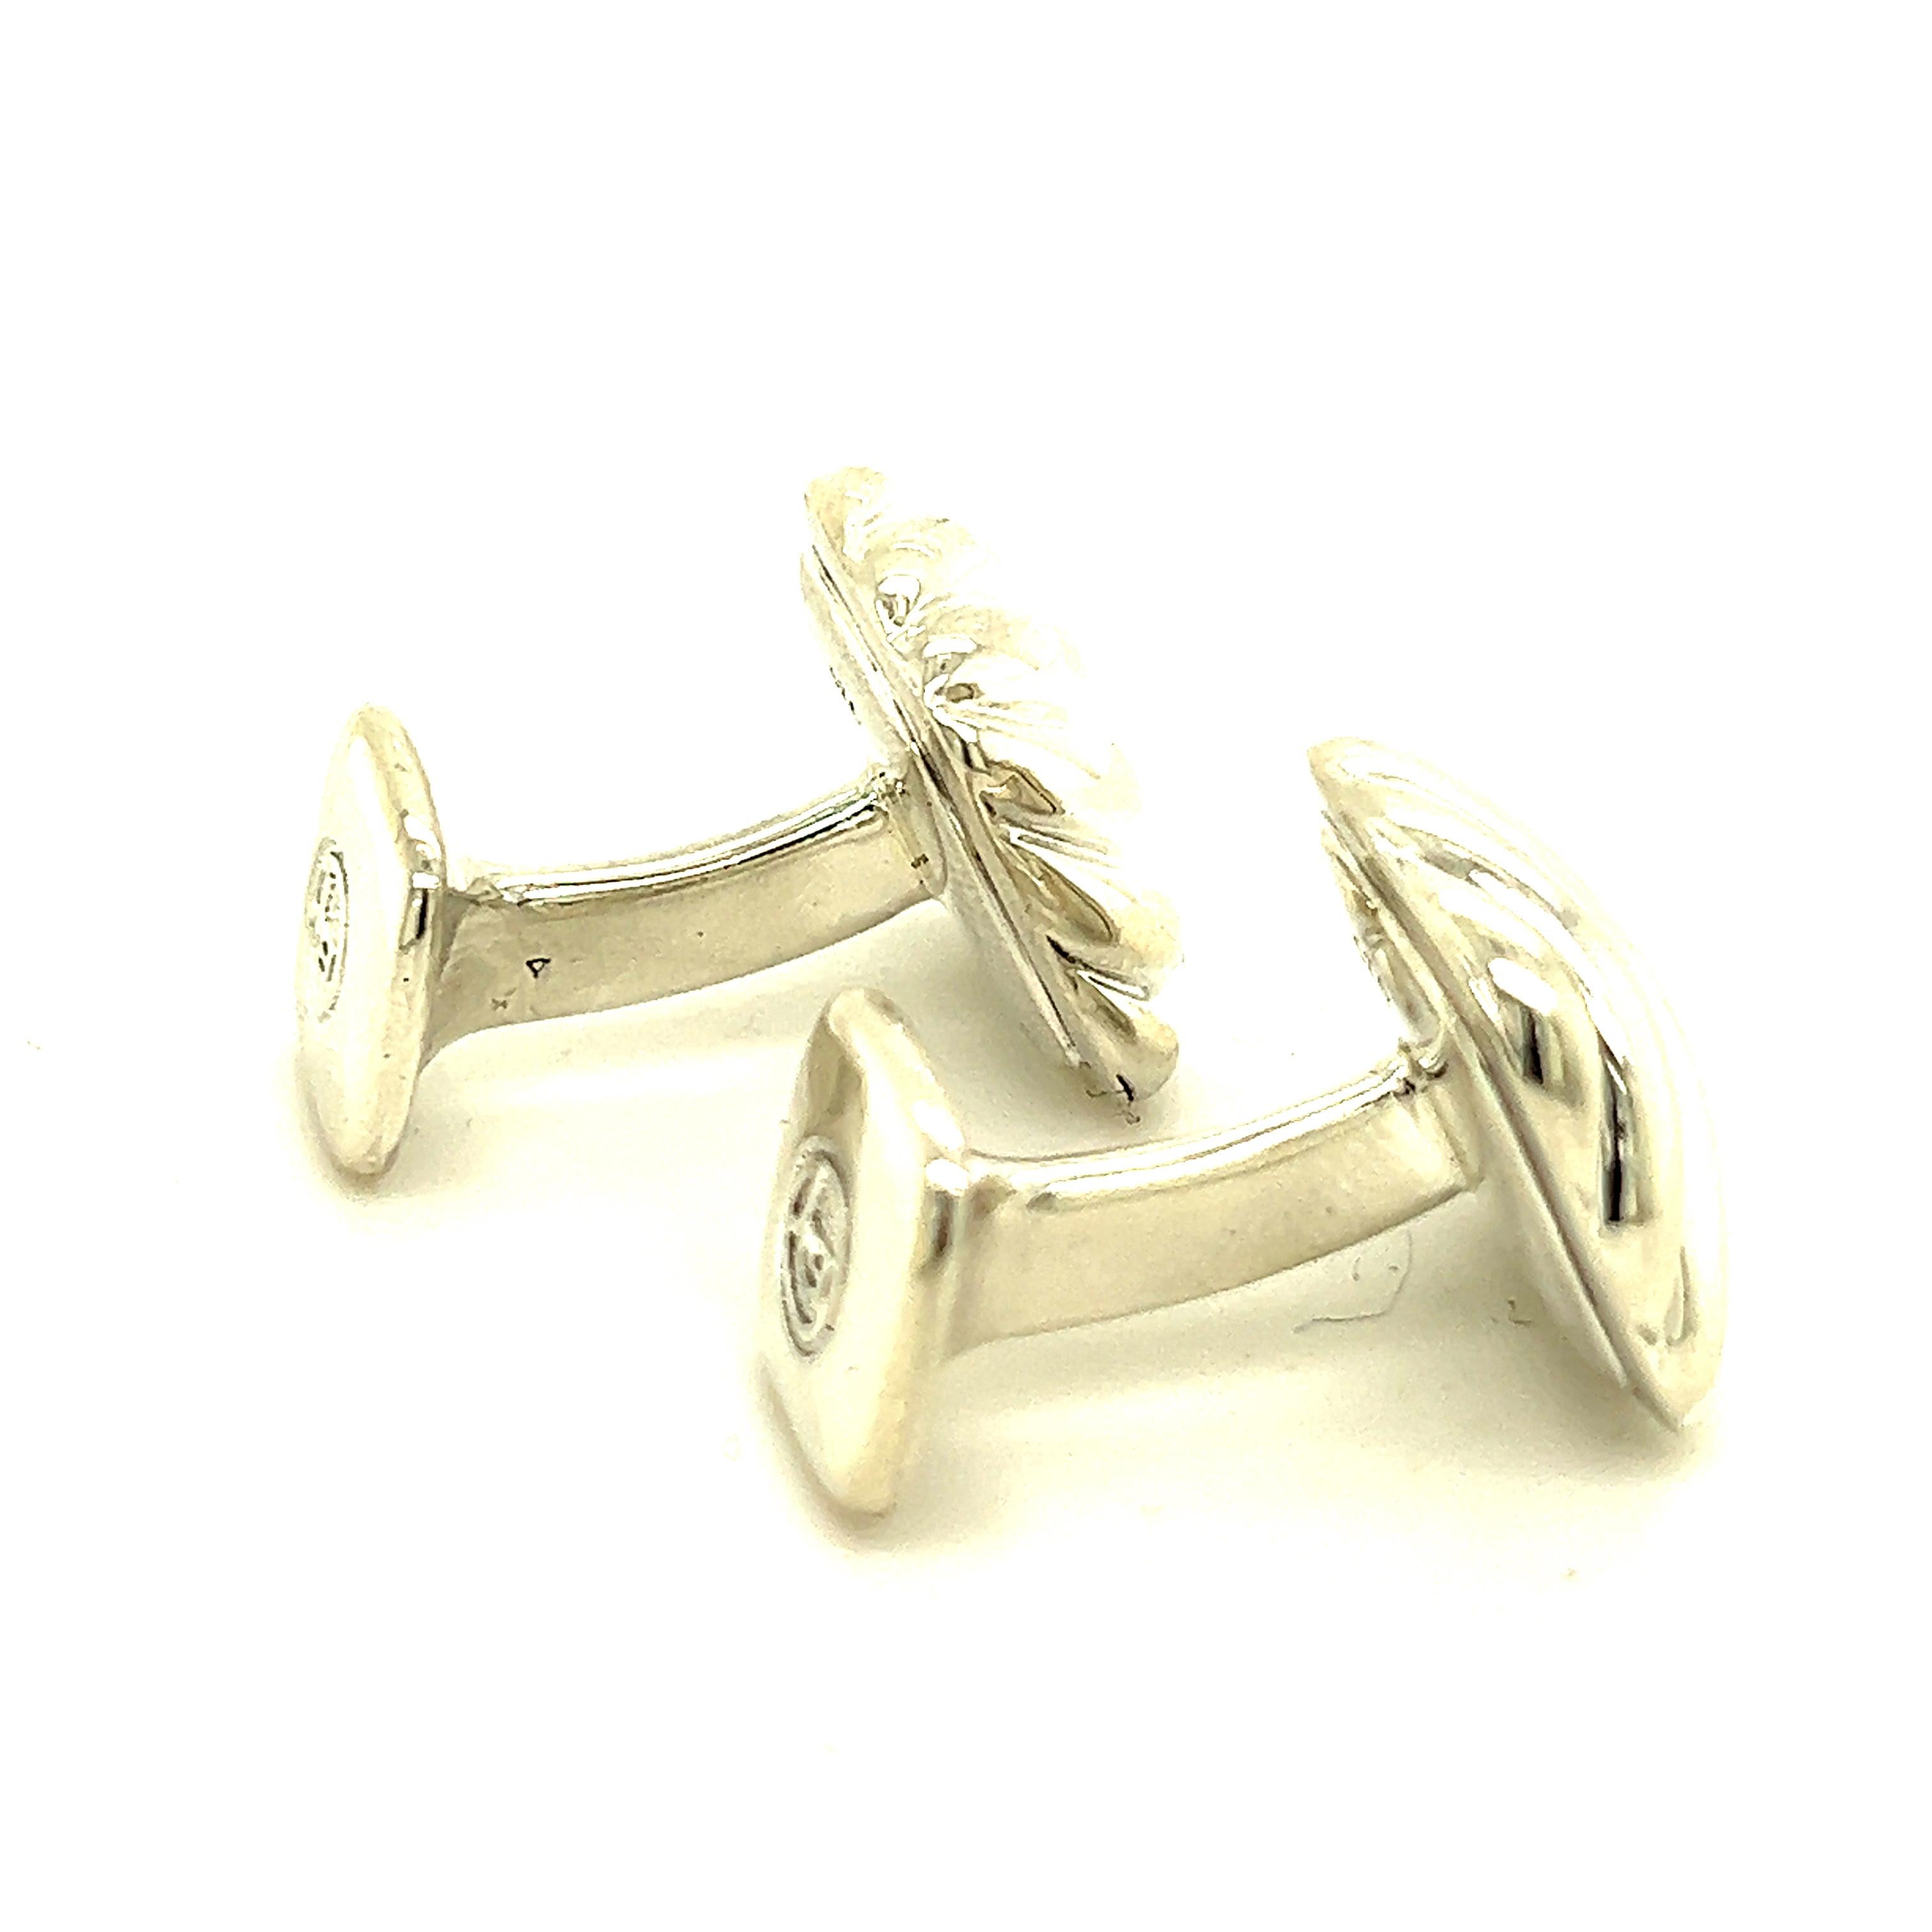 David Yurman Estate Mens Cufflinks Sterling Silver In Good Condition For Sale In Brooklyn, NY